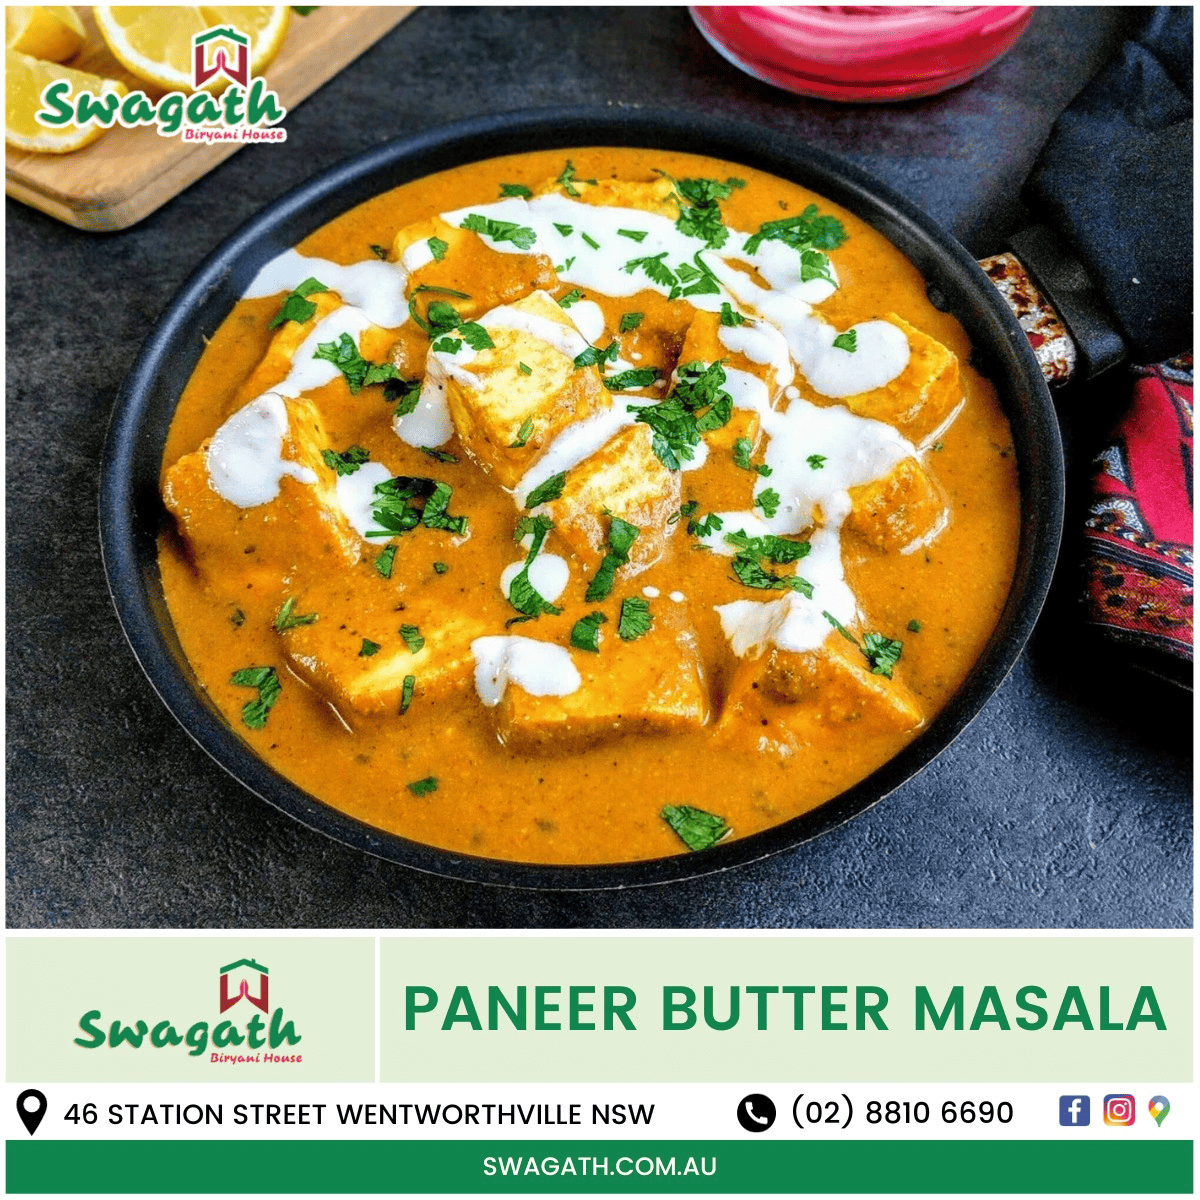 Plate of tempting Paneer Butter Masala, a North Indian delicacy